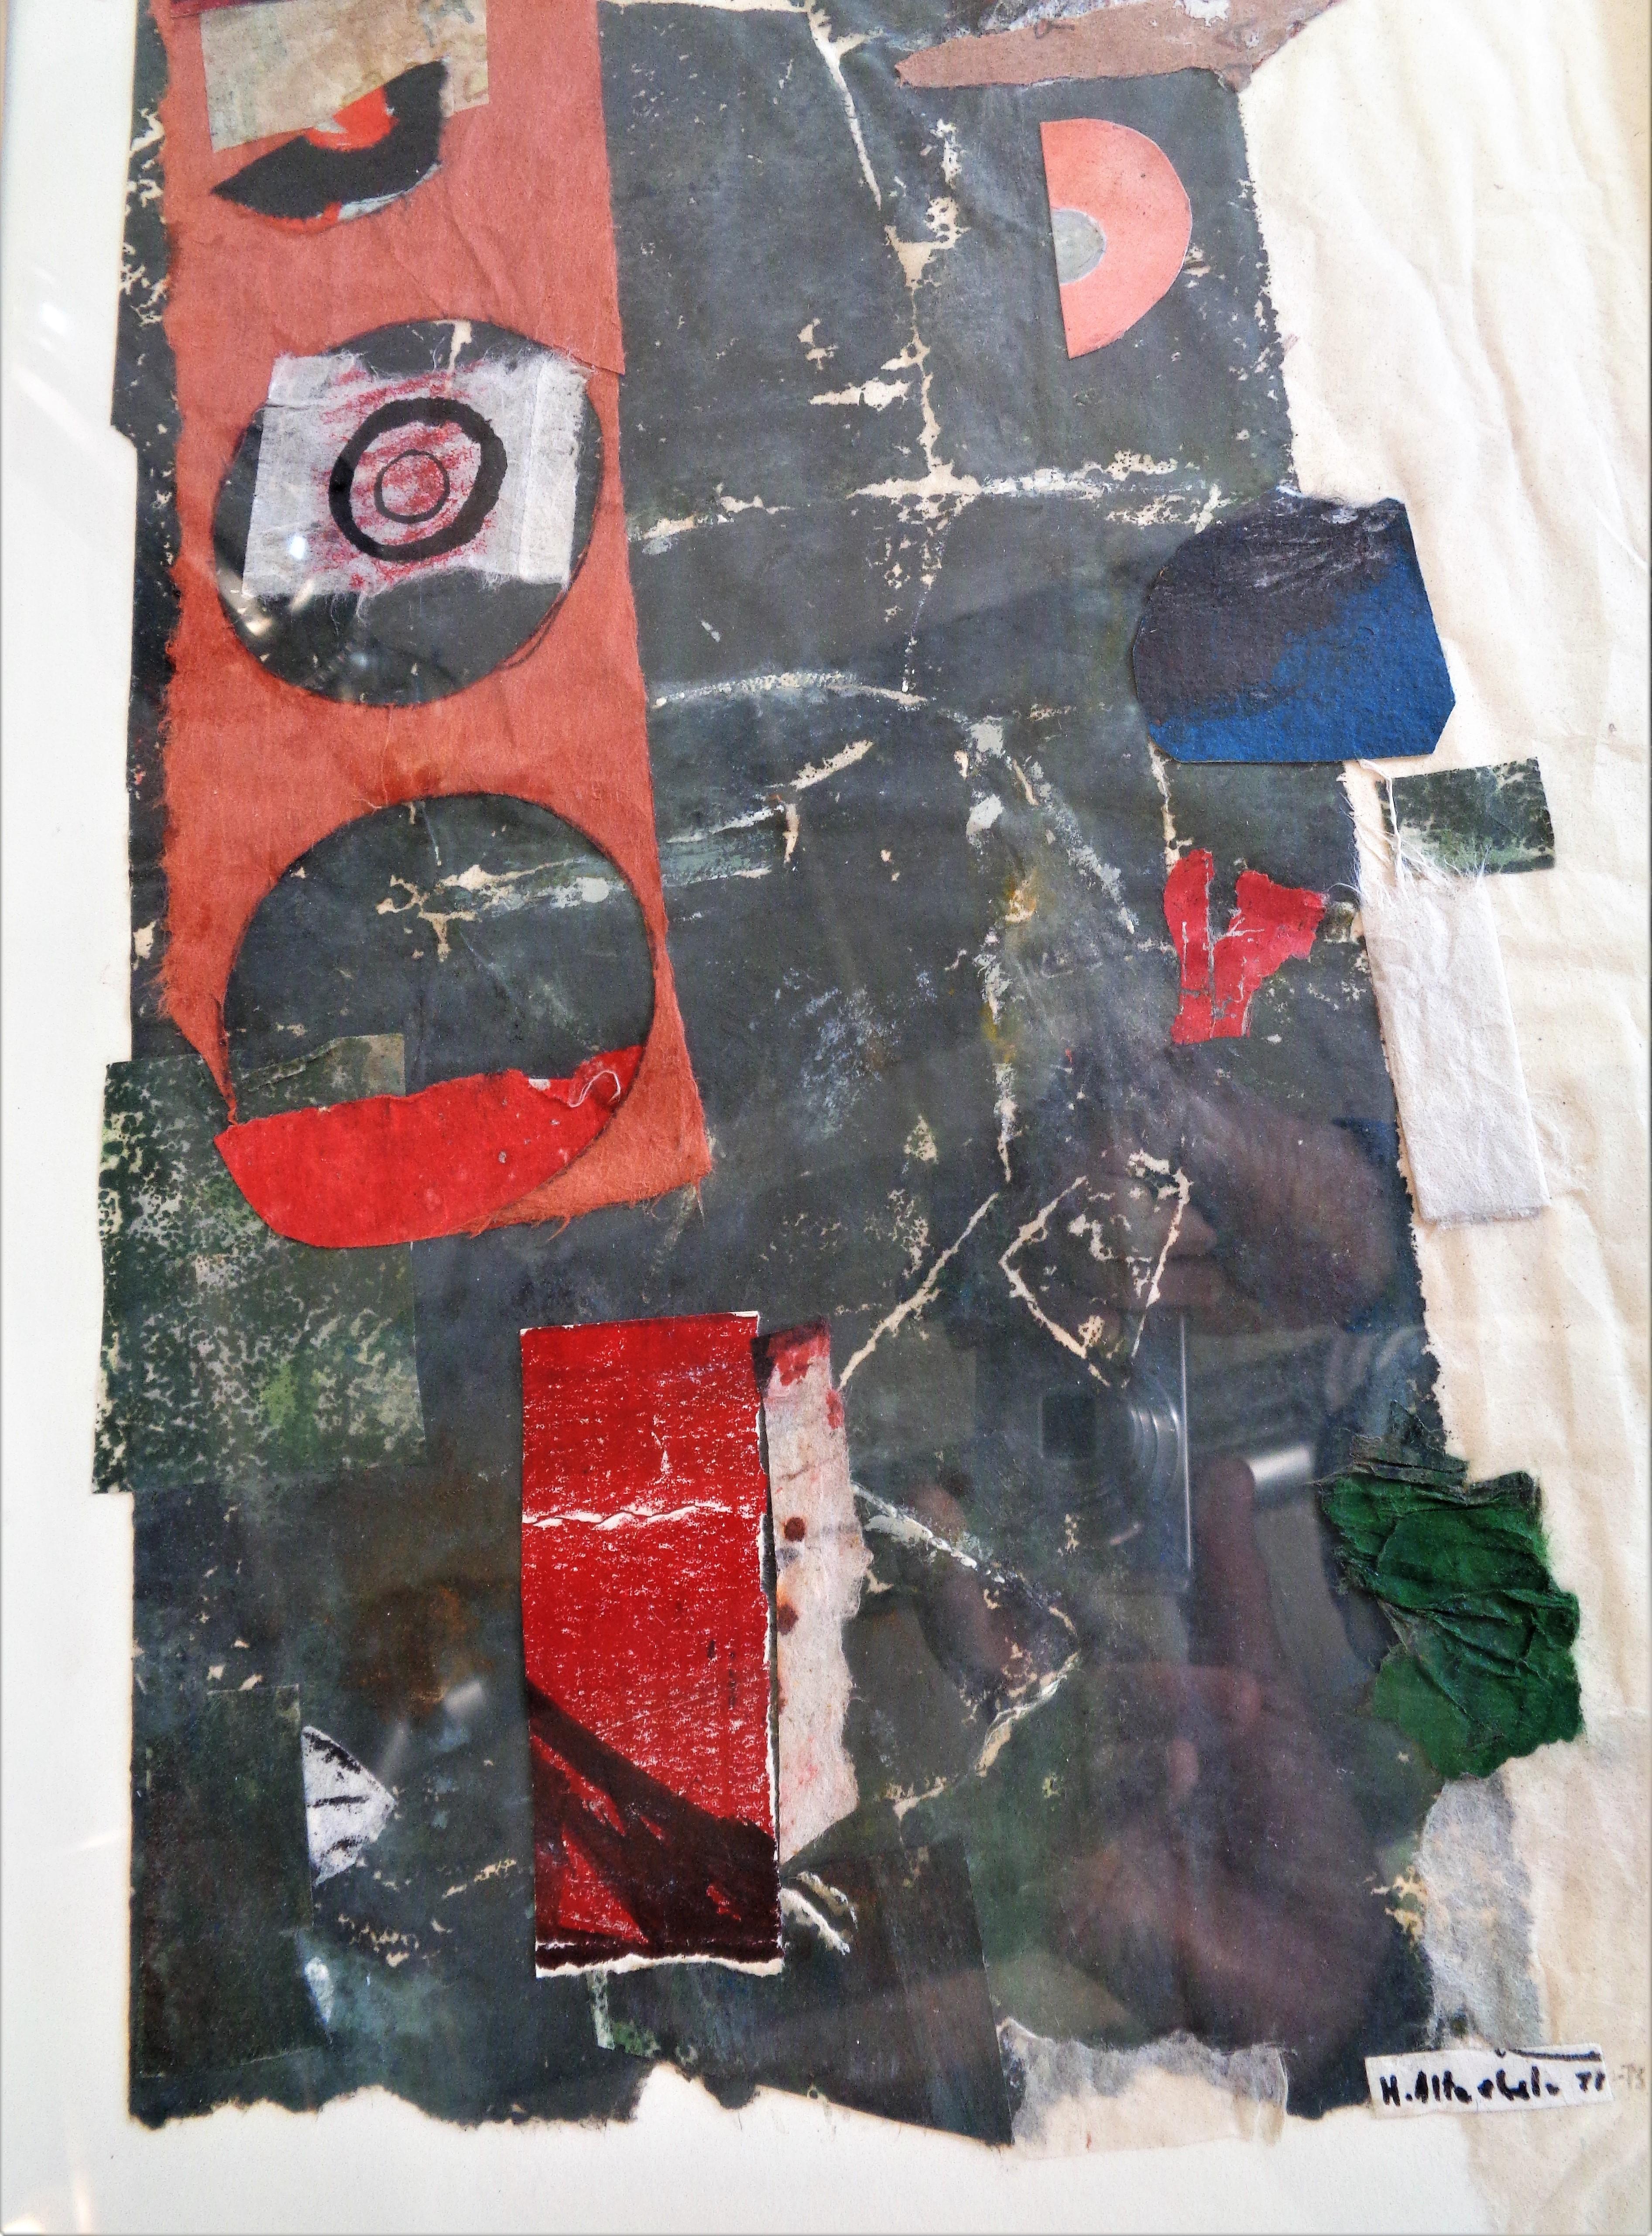 Hand-Crafted Abstract Mixed Media Collage Painting by Hilda Altschule, 1971